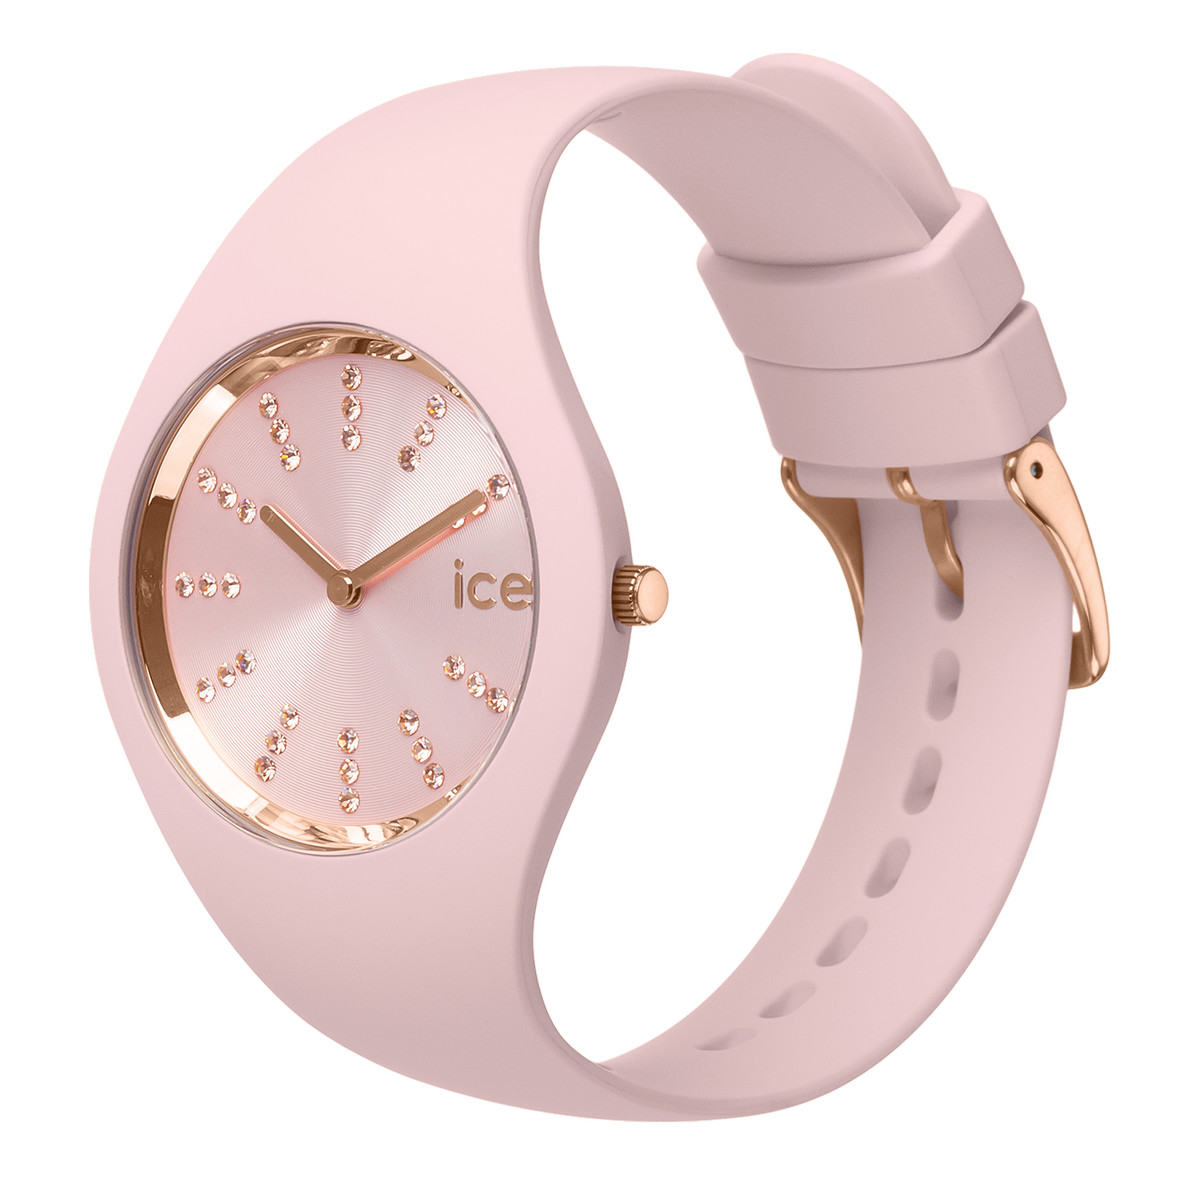 Montre ICE WATCH ice cosmos femme bracelet silicone rose - vue D1